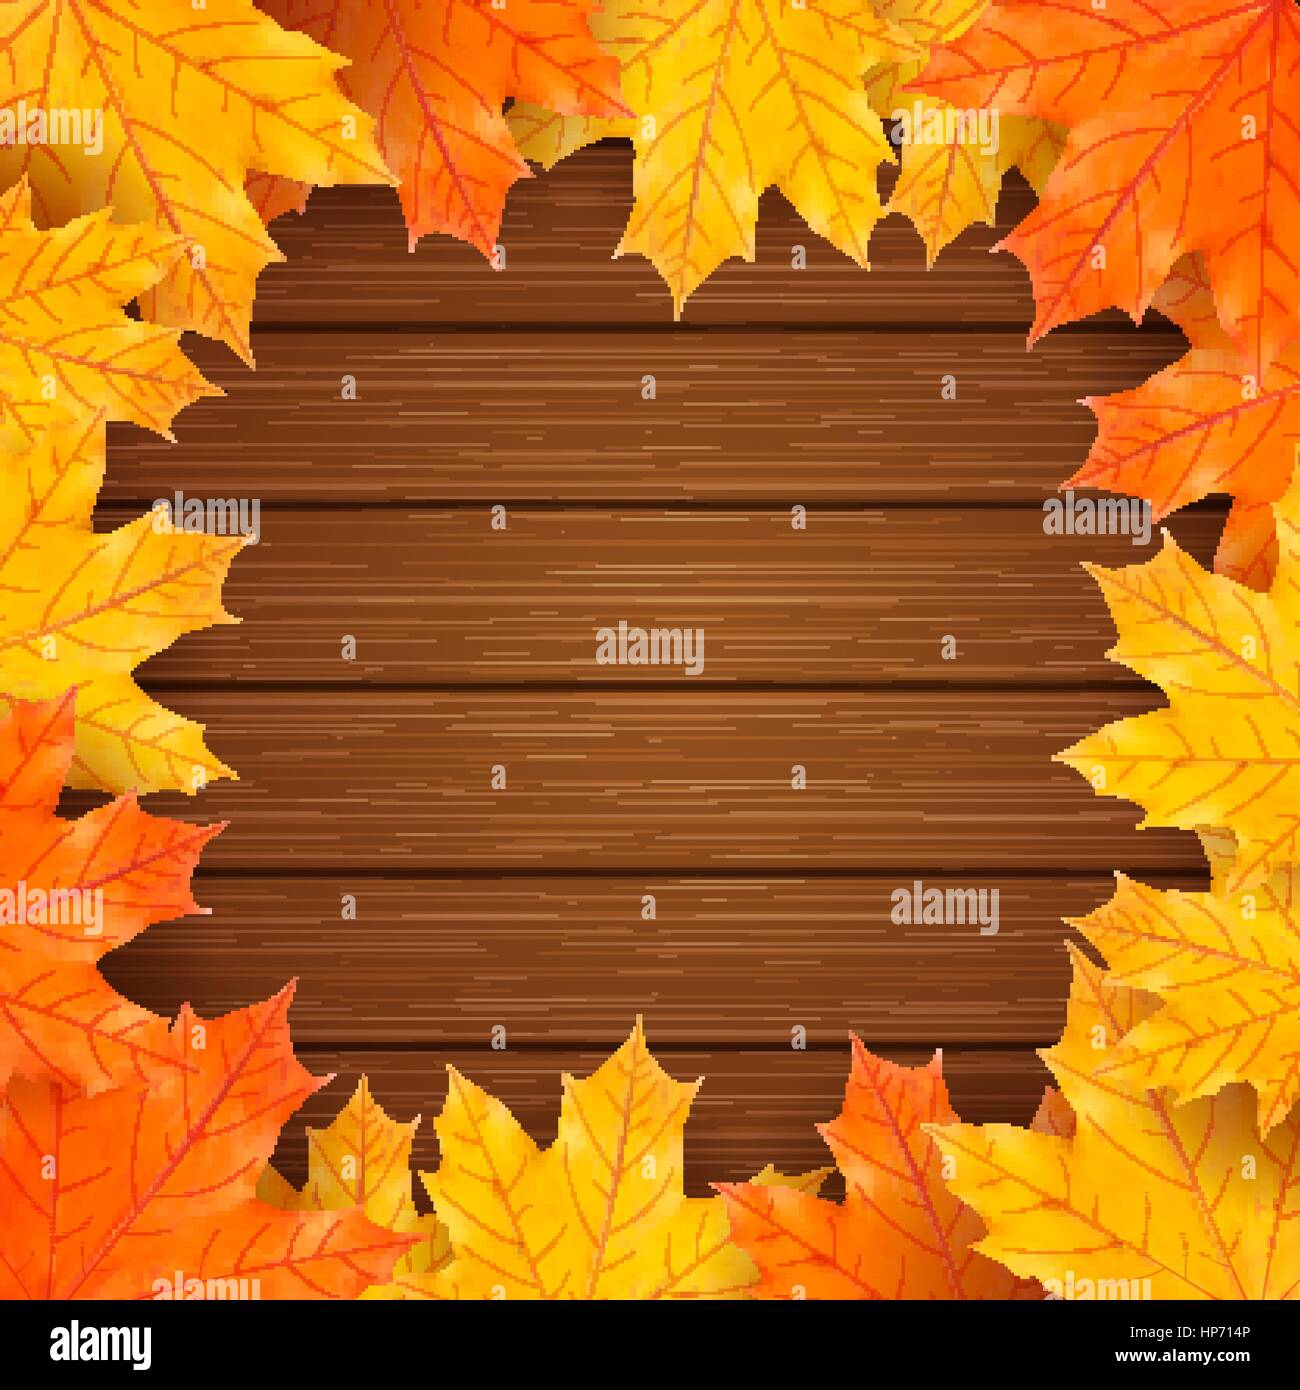 Autumn vector background with realistic maple leaves on wooden board Stock Vector